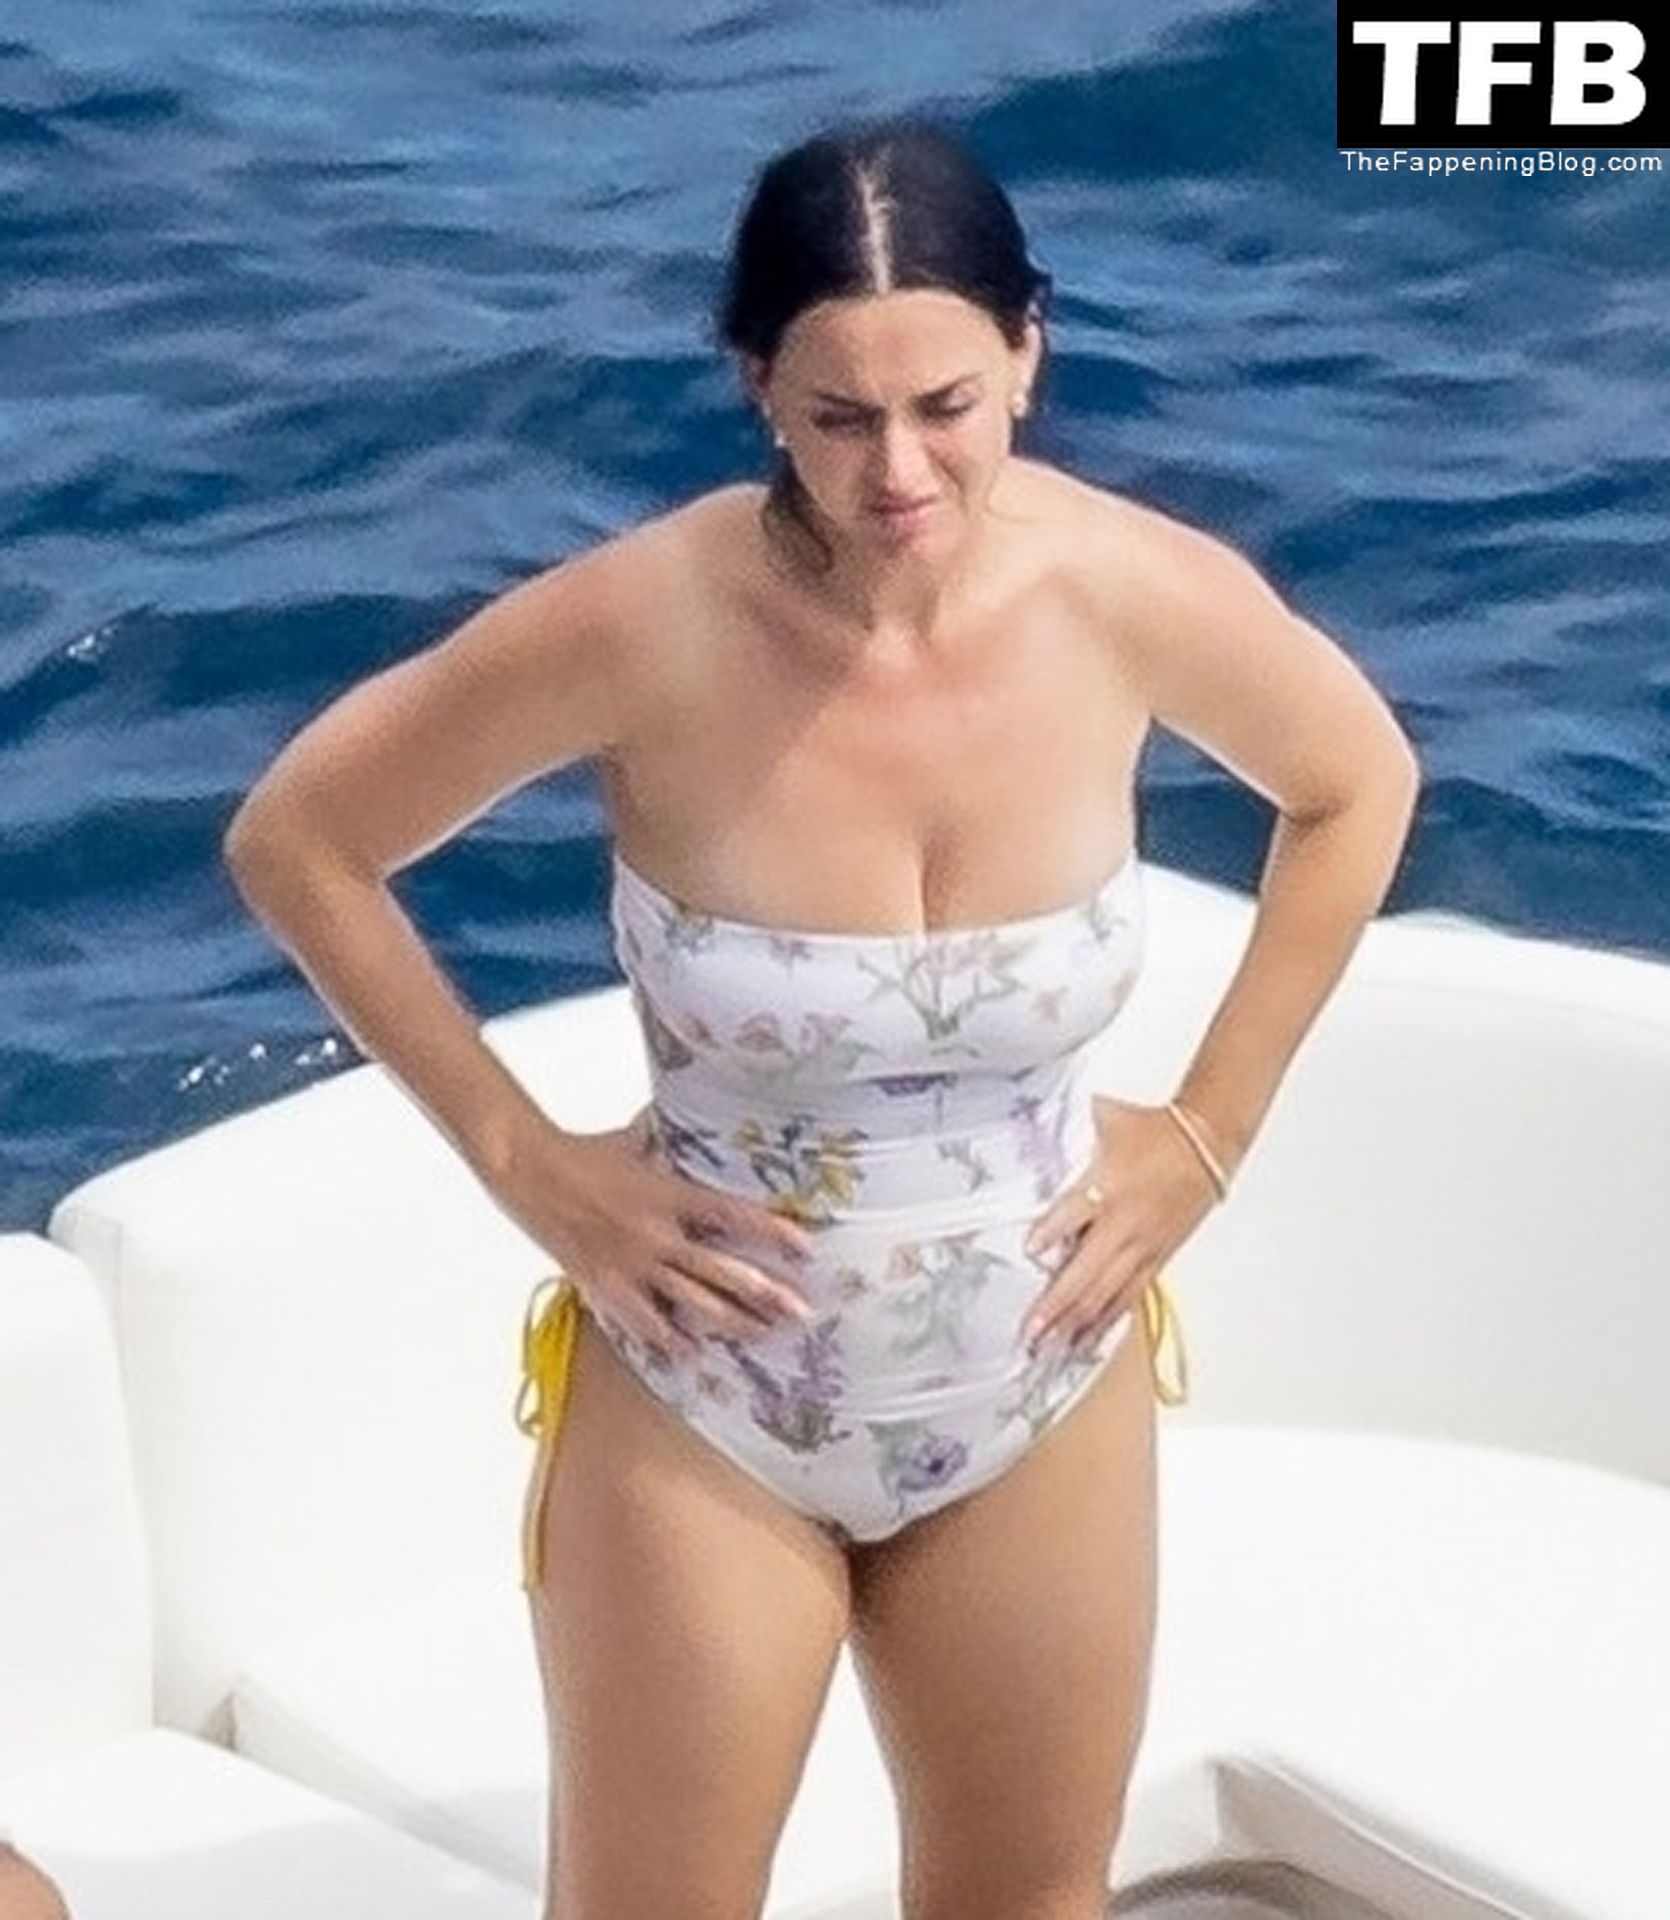 Katy Perry Sexy The Fappening Blog 1 - Katy Perry Rocks a Strapless Swimsuit While Enjoying a Beach Day with Orlando Bloom in Positano (105 Photos)